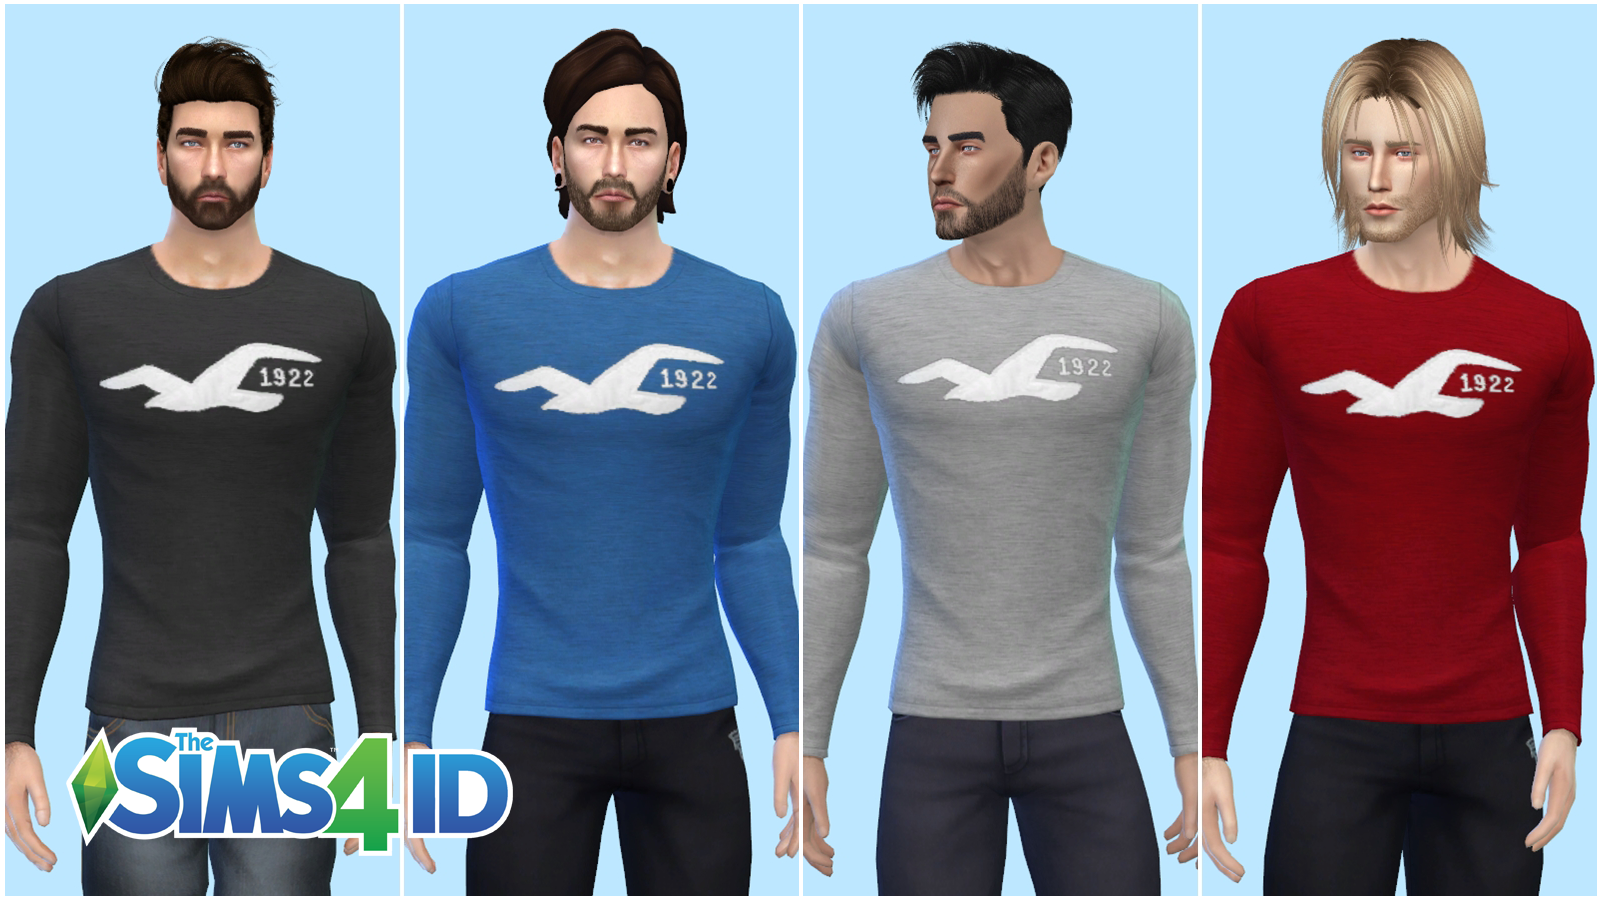 [Clothing] Hollister 1922 Long Sleeve Shirt - The Sims™ 4 ID